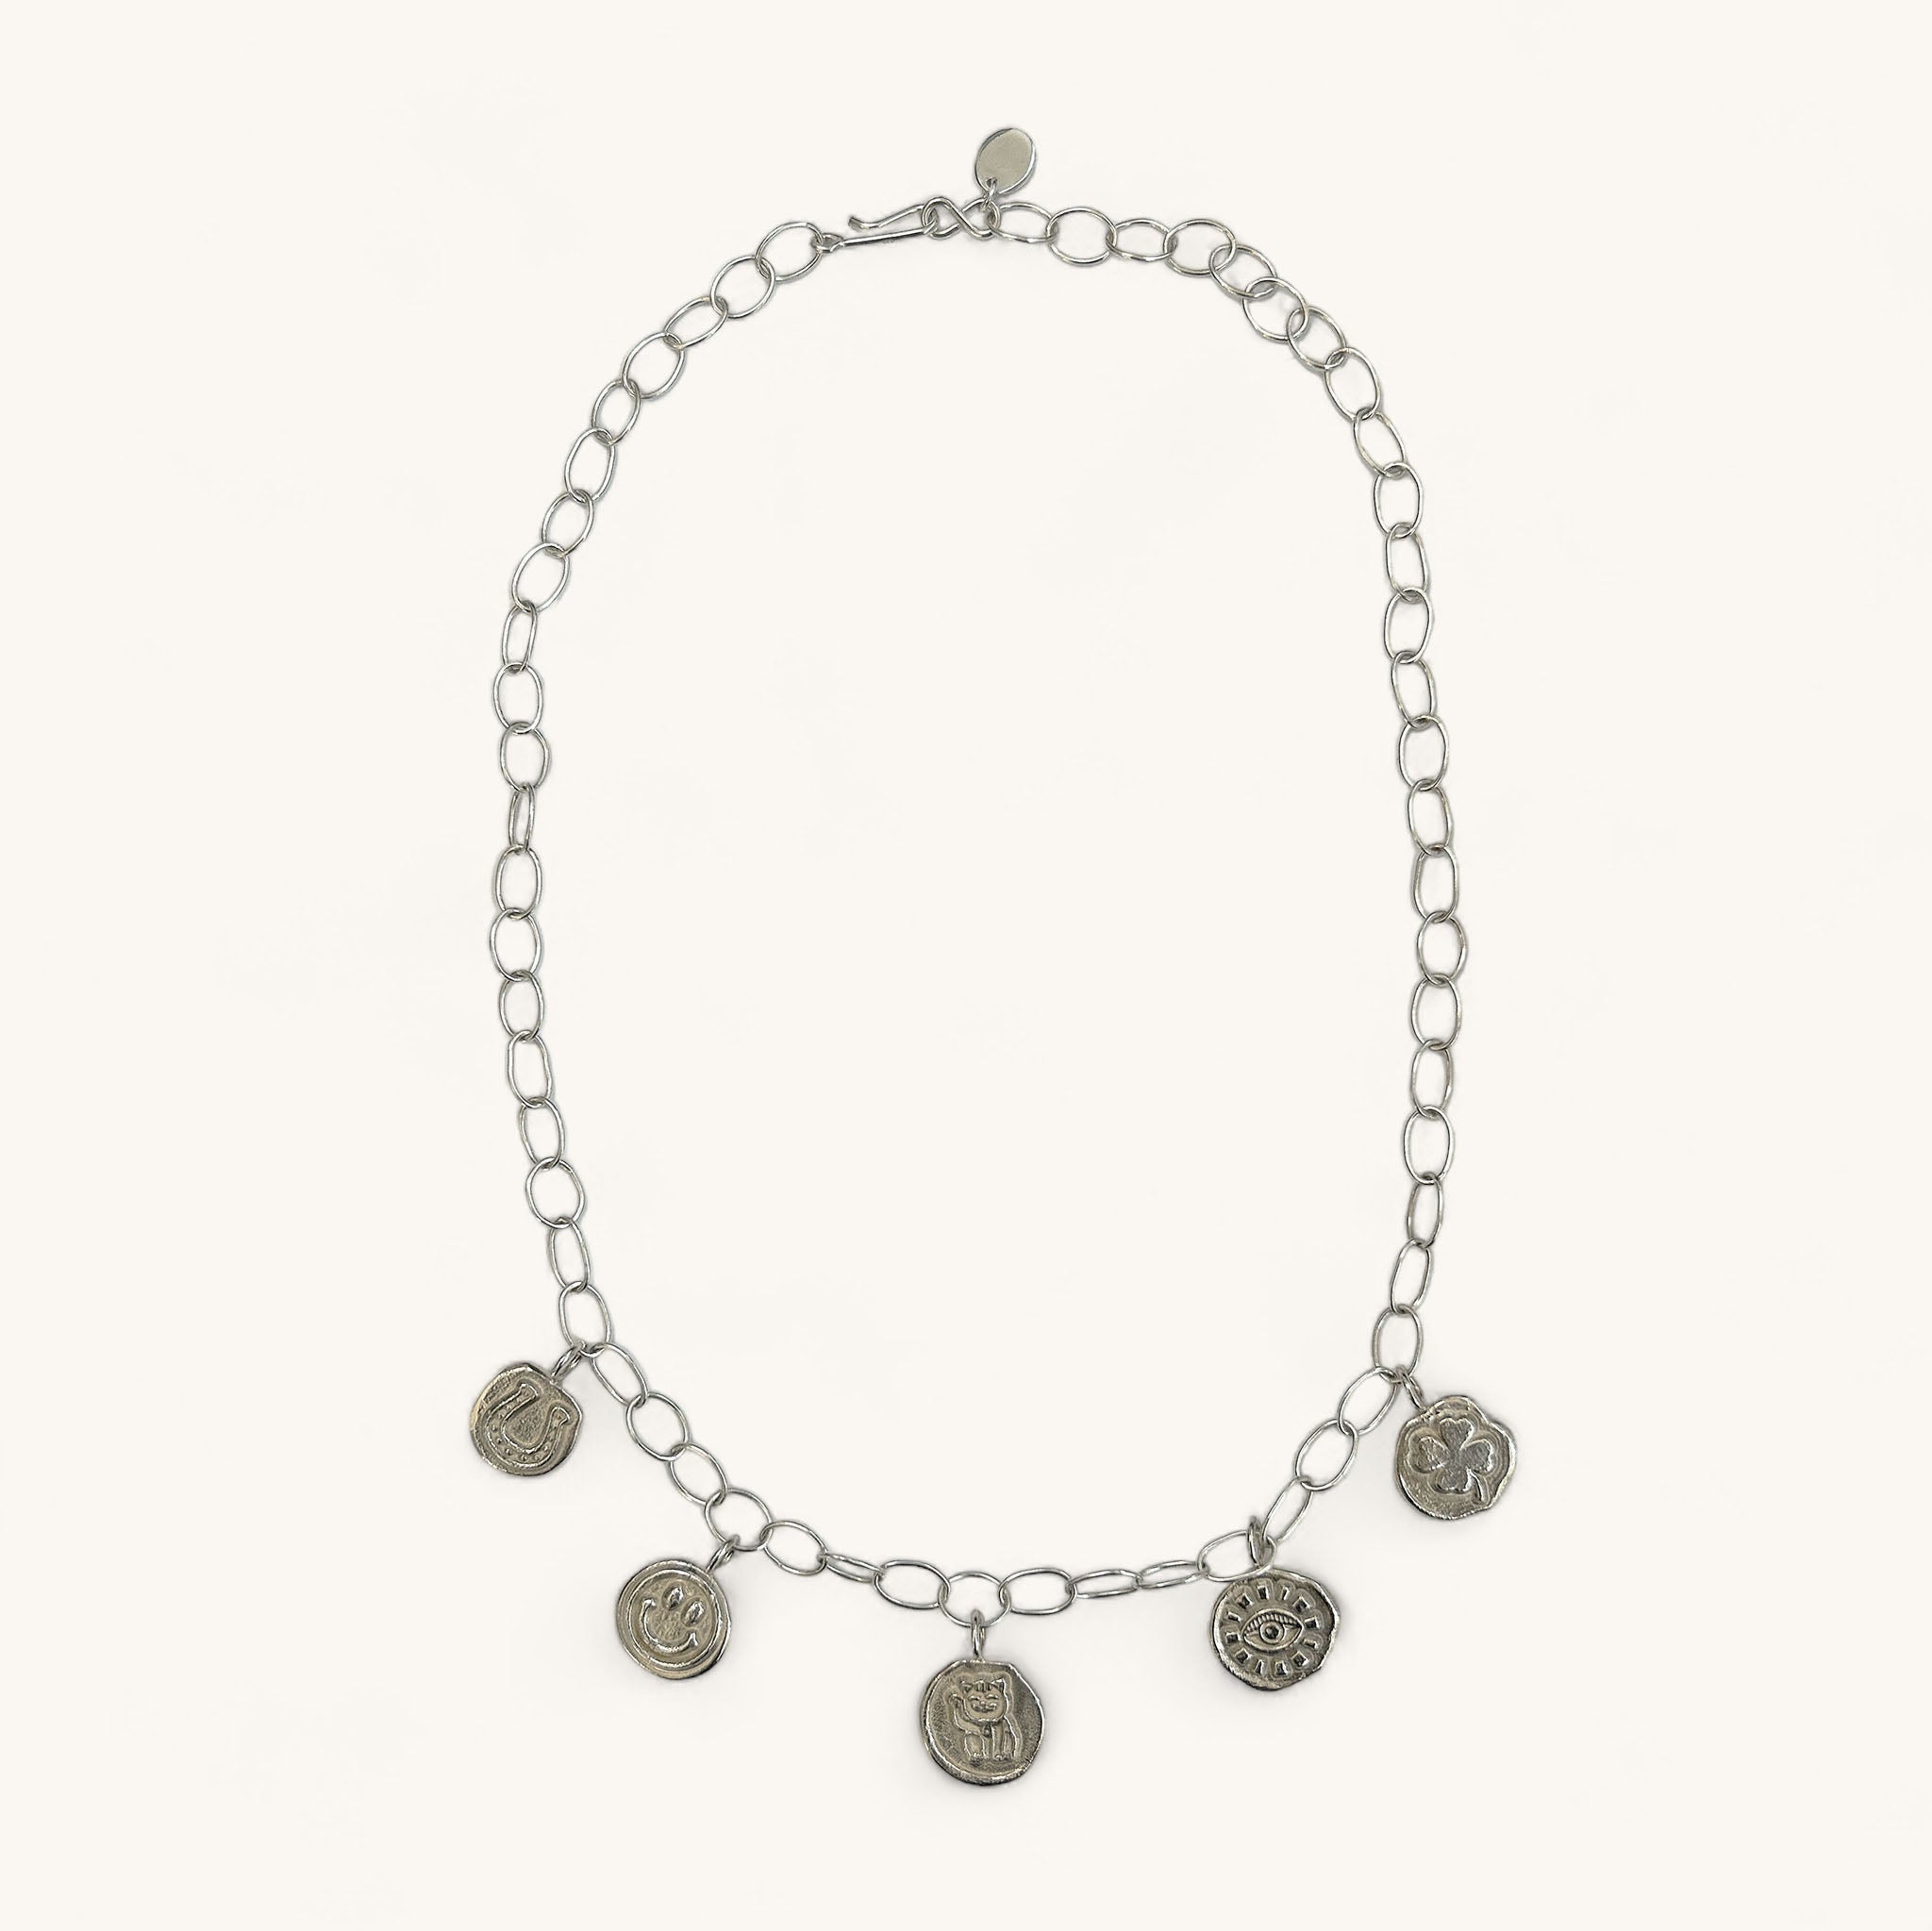 Jennifer Loiselle personalised Lucky Charm Organic Chain Silver Necklace